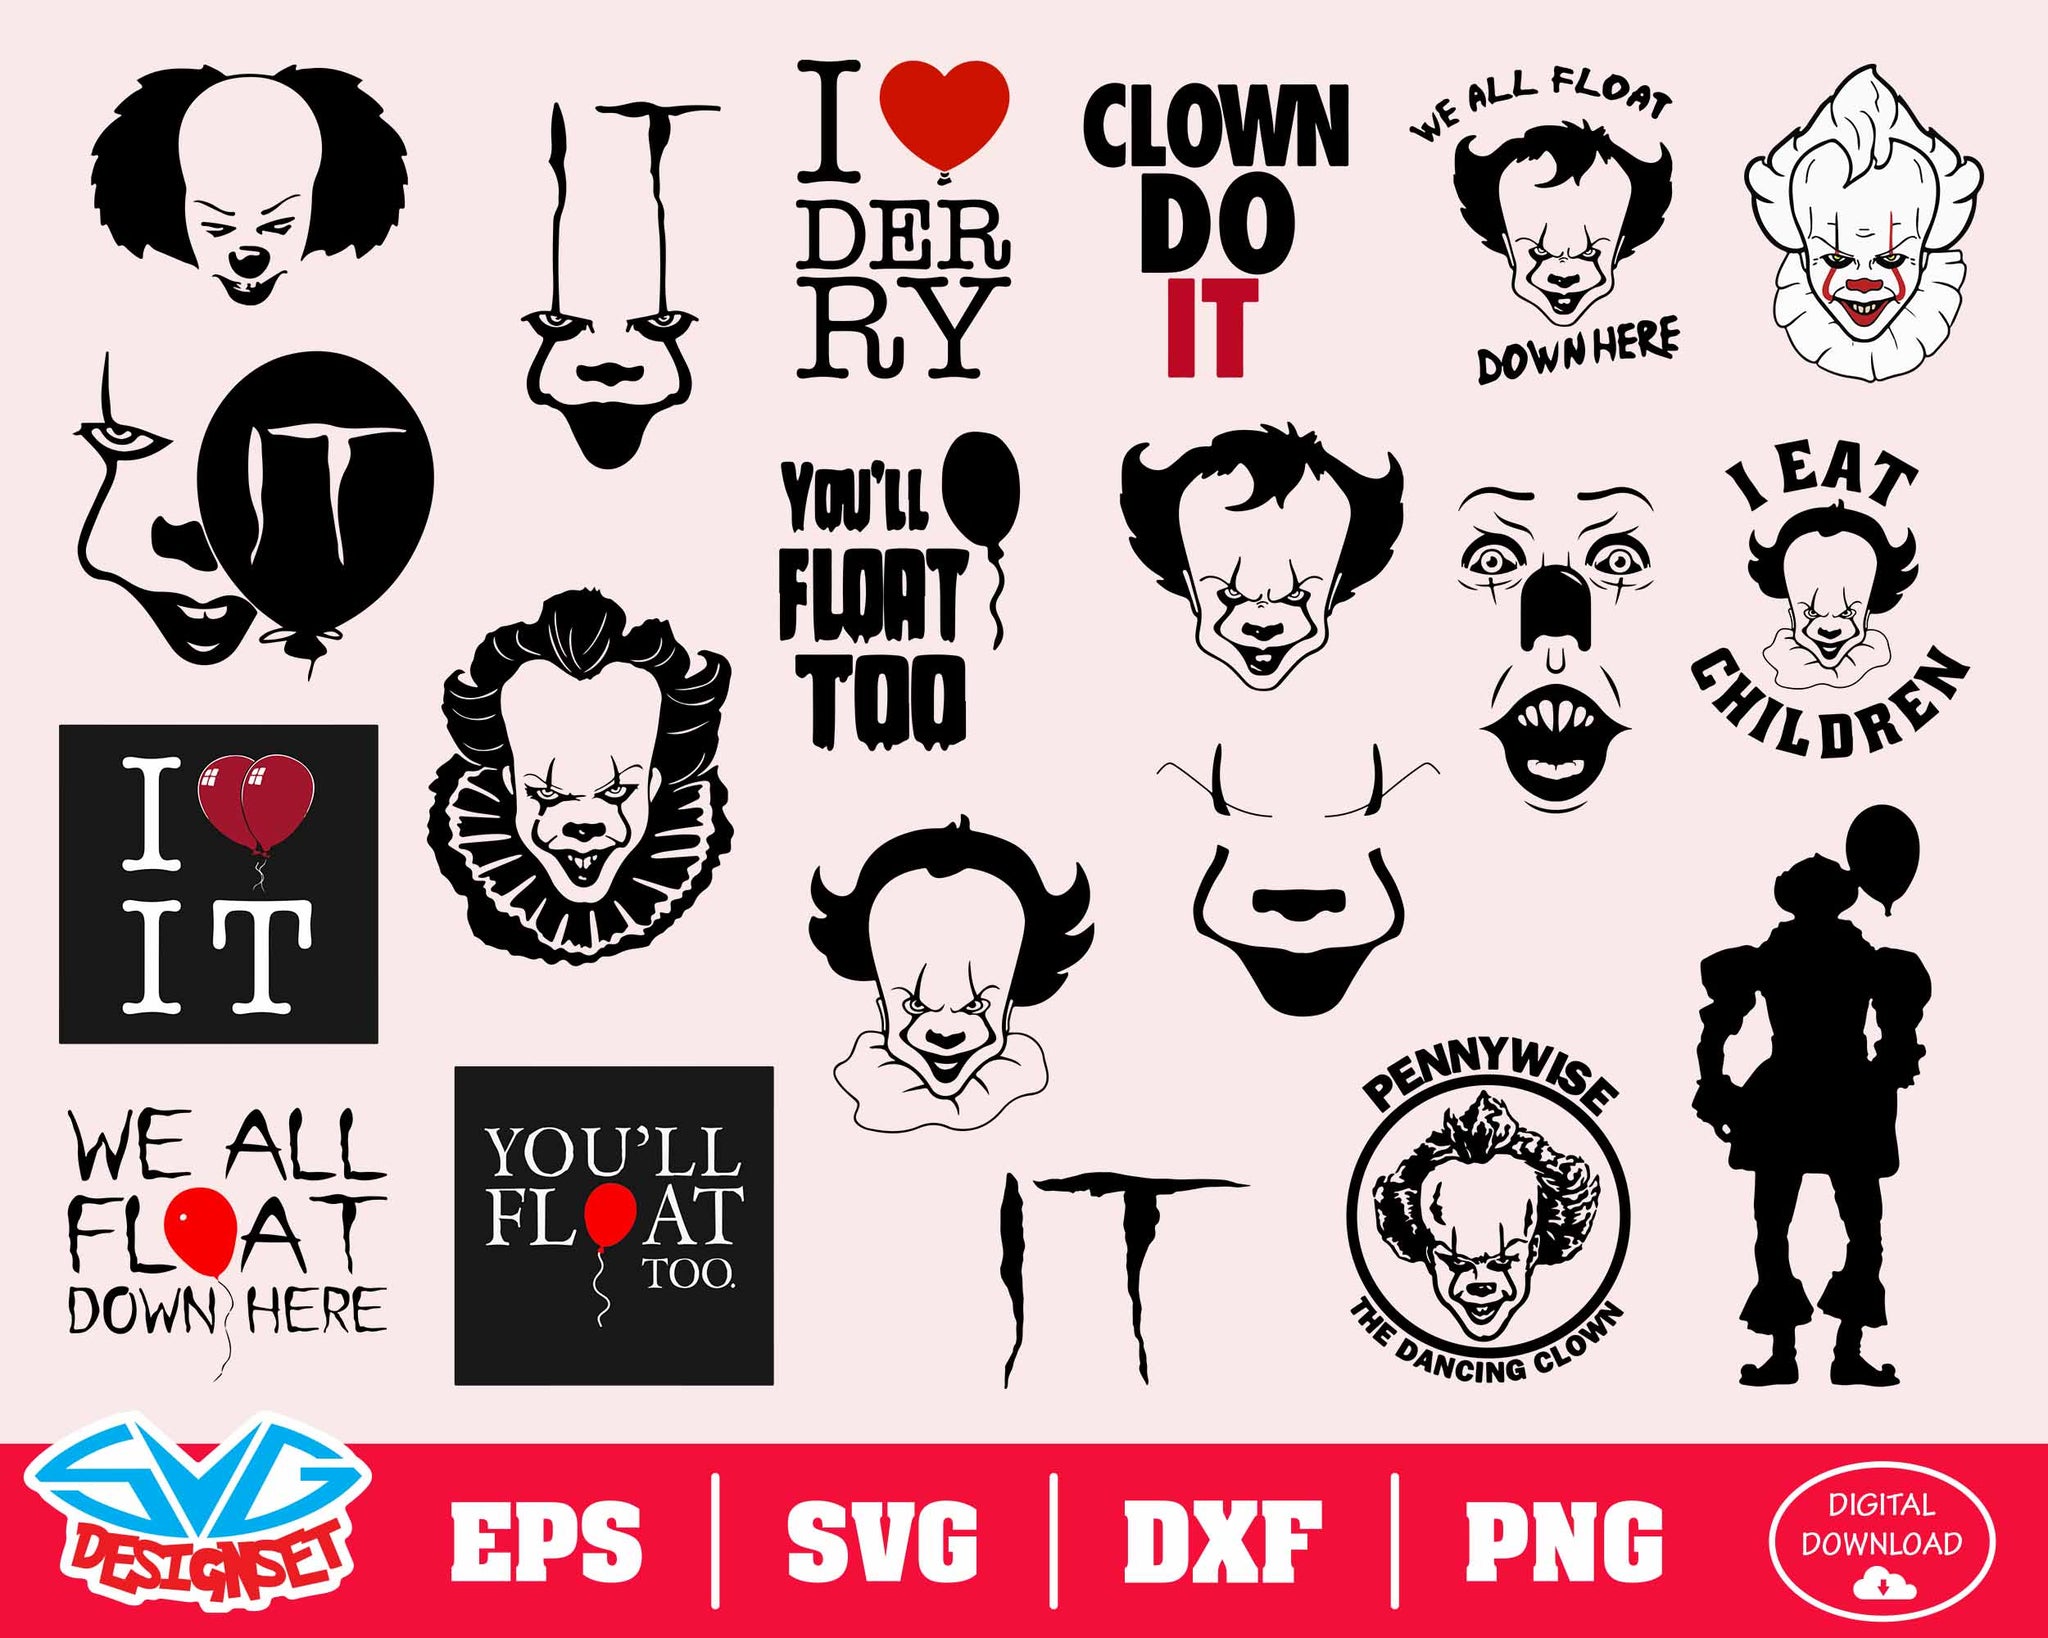 Pennywise Svg, Dxf, Eps, Png, Clipart, Silhouette and Cutfiles #3 - SVGDesignSets